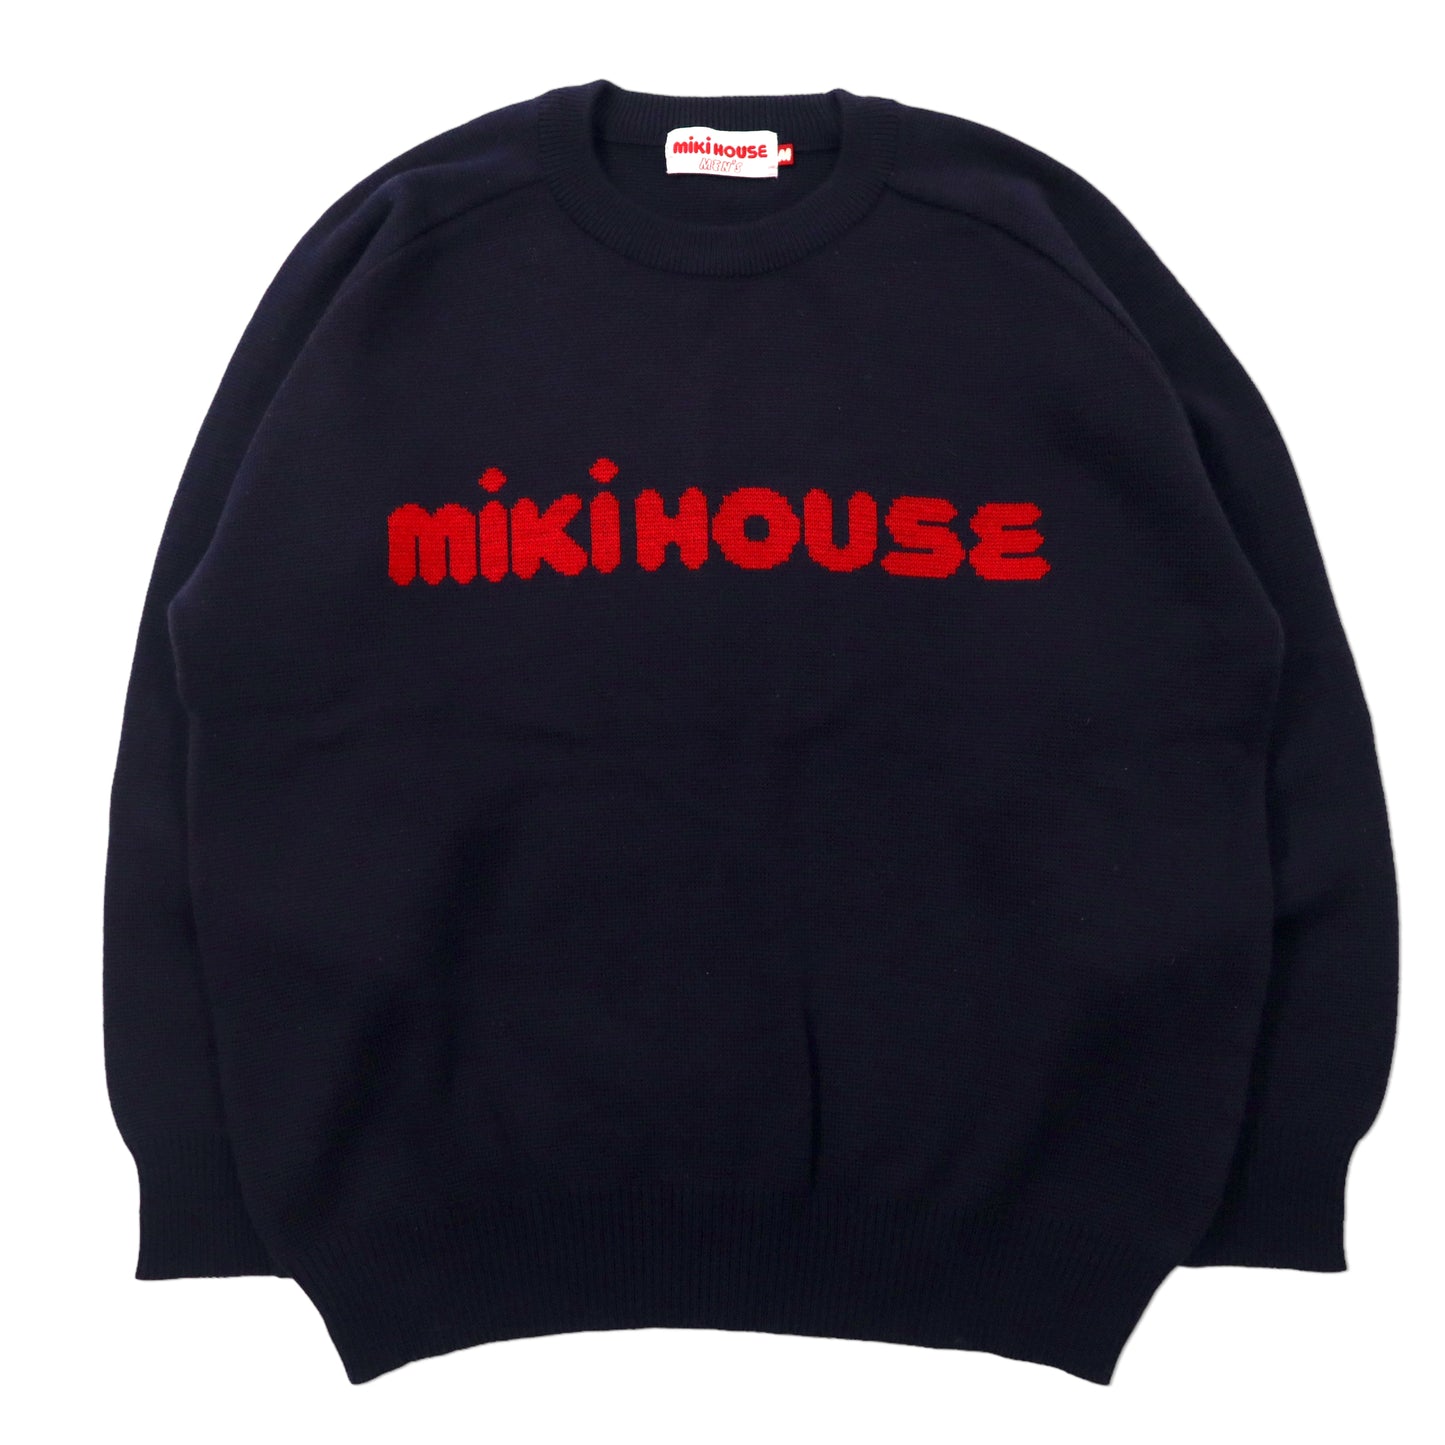 MIKI HOUSE MEN'S 90s Logonit Sweater M Navy Acrylic Elbow Patch